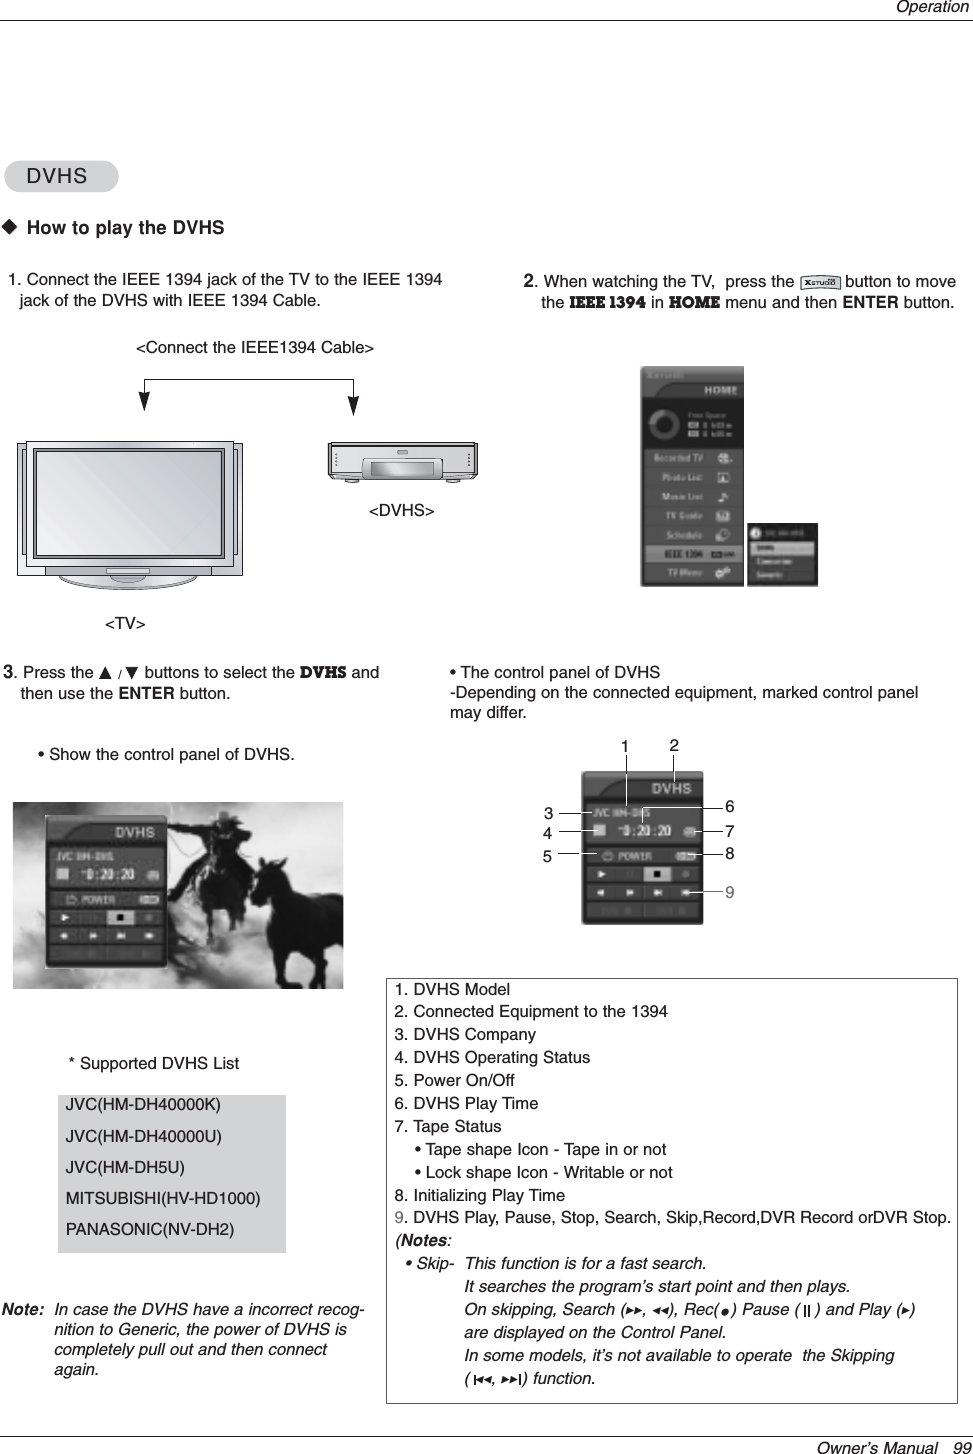 Owner’s Manual   99OperationDVHSDVHSWWHow to play the DVHS&lt;TV&gt;&lt;DVHS&gt;1. Connect the IEEE 1394 jack of the TV to the IEEE 1394jack of the DVHS with IEEE 1394 Cable.2. When watching the TV,  press the          button to movethe IEEE 1394 in HOME menu and then ENTER button.* Supported DVHS ListJVC(HM-DH40000K)JVC(HM-DH40000U)JVC(HM-DH5U)MITSUBISHI(HV-HD1000) PANASONIC(NV-DH2) • The control panel of DVHS-Depending on the connected equipment, marked control panelmay differ.343. Press the D/Ebuttons to select the DVHS andthen use the ENTER button.• Show the control panel of DVHS.576891. DVHS Model2. Connected Equipment to the 13943. DVHS Company4. DVHS Operating Status5. Power On/Off6. DVHS Play Time7. Tape Status• Tape shape Icon - Tape in or not • Lock shape Icon - Writable or not 8. Initializing Play Time9. DVHS Play, Pause, Stop, Search, Skip,Record,DVR Record orDVR Stop.(Notes:• Skip-  This function is for a fast search.It searches the program’s start point and then plays.On skipping, Search (GG,FF), Rec( ) Pause (   ) and Play (G)are displayed on the Control Panel.In some models, it’s not available to operate  the Skipping  (FF,GG) function.12&lt;Connect the IEEE1394 Cable&gt;Note: In case the DVHS have a incorrect recog-nition to Generic, the power of DVHS iscompletely pull out and then connectagain.